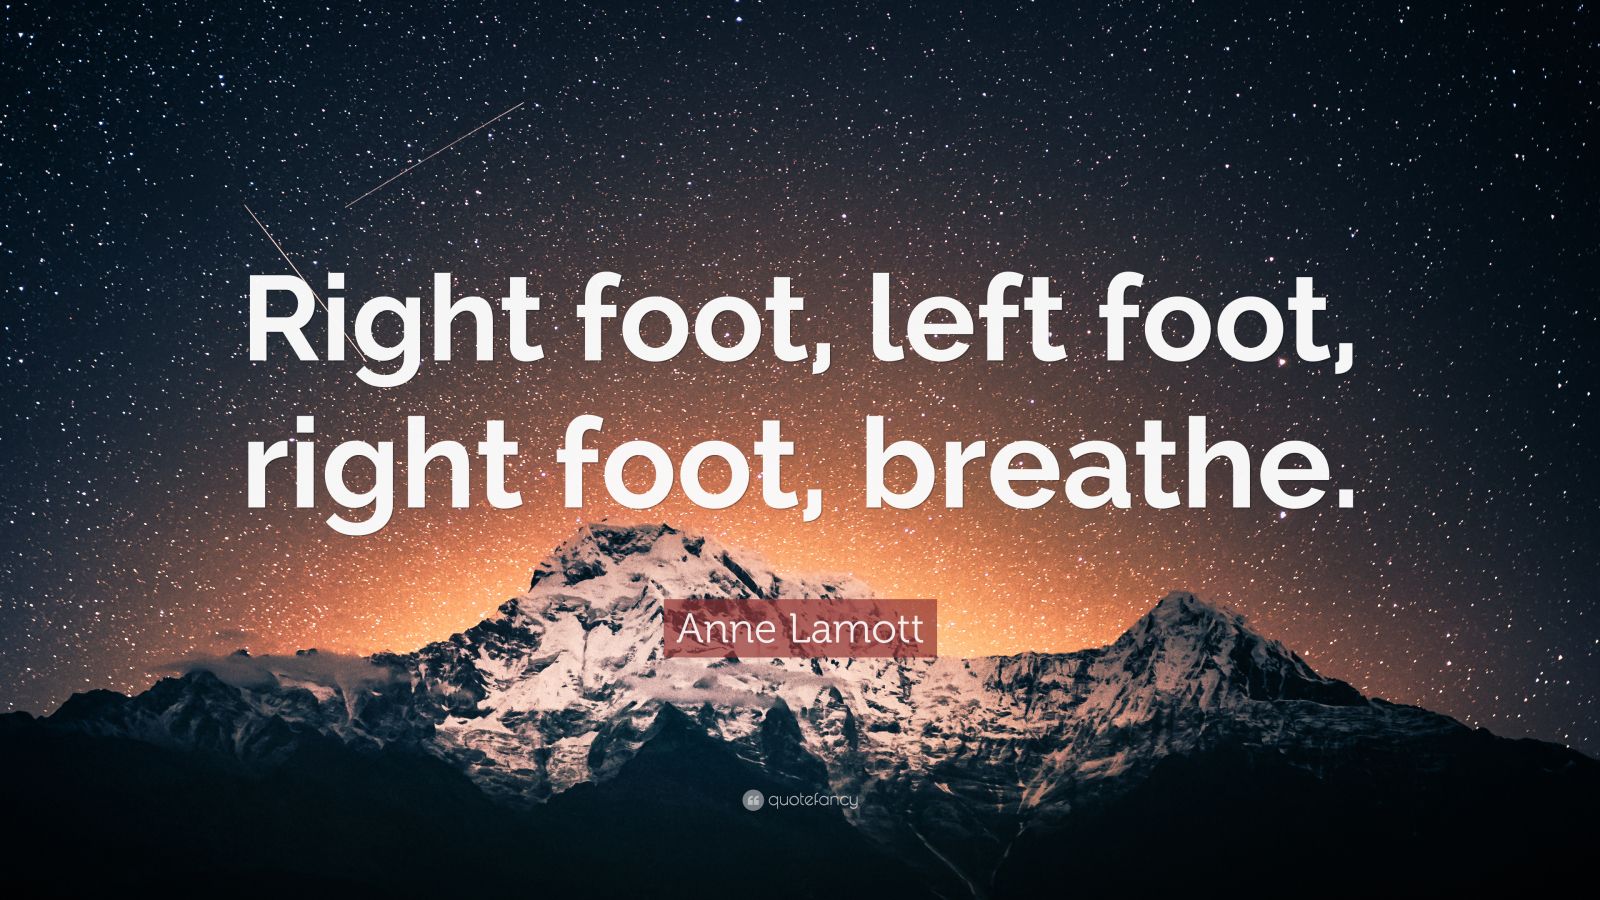 Anne Lamott Quote “right Foot Left Foot Right Foot Breathe” 12